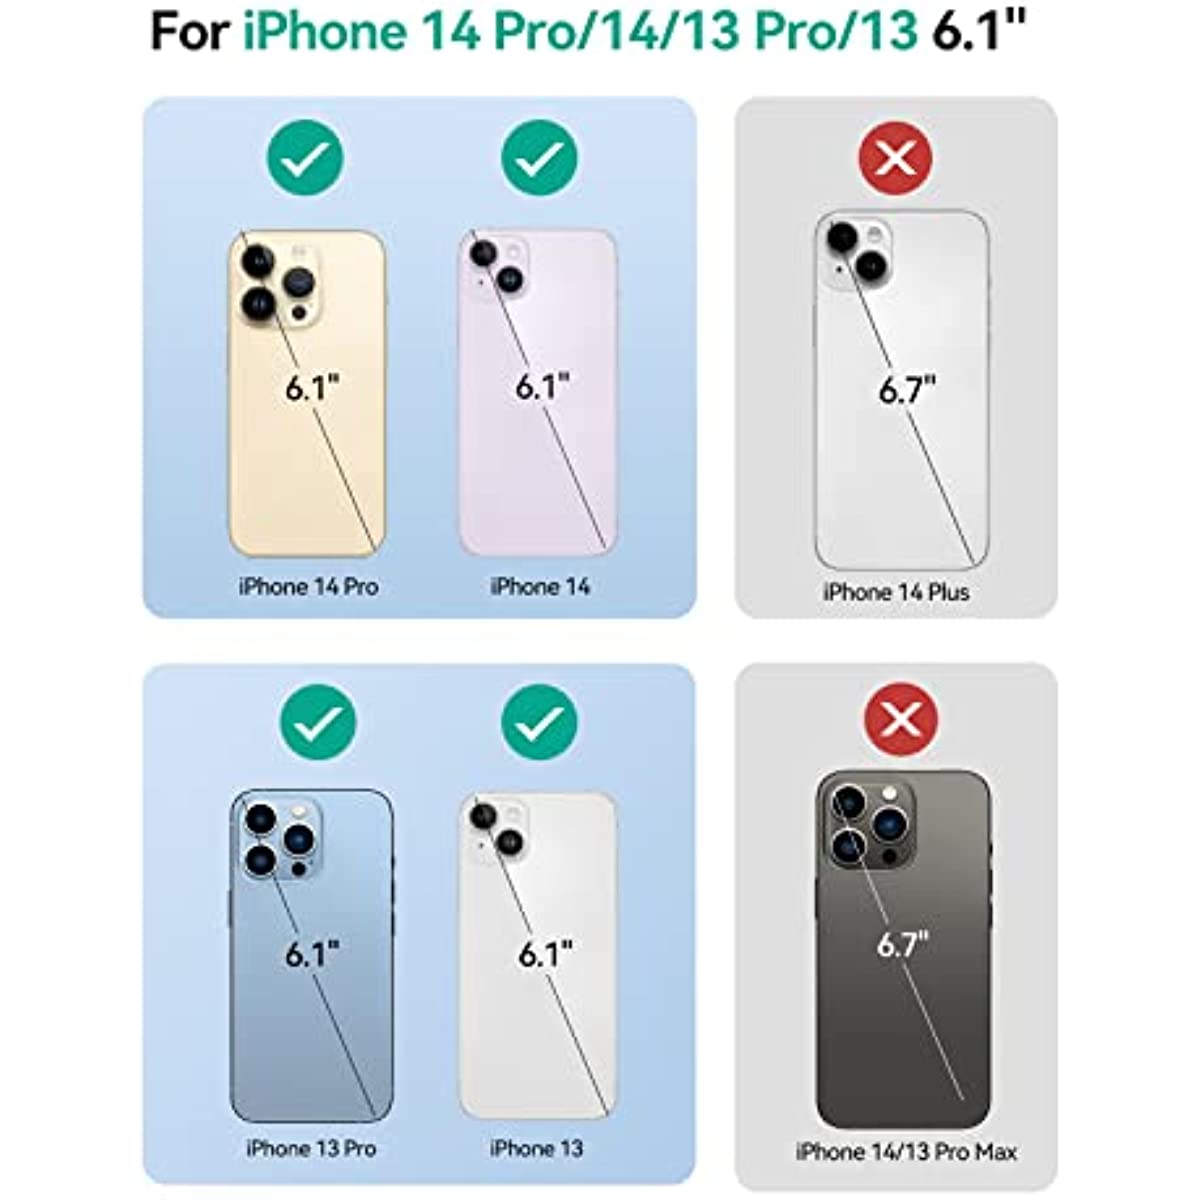 Wireless Battery Case for iPhone 14 Pro/14/13/13 Pro 10000mAh (6.1 inch)